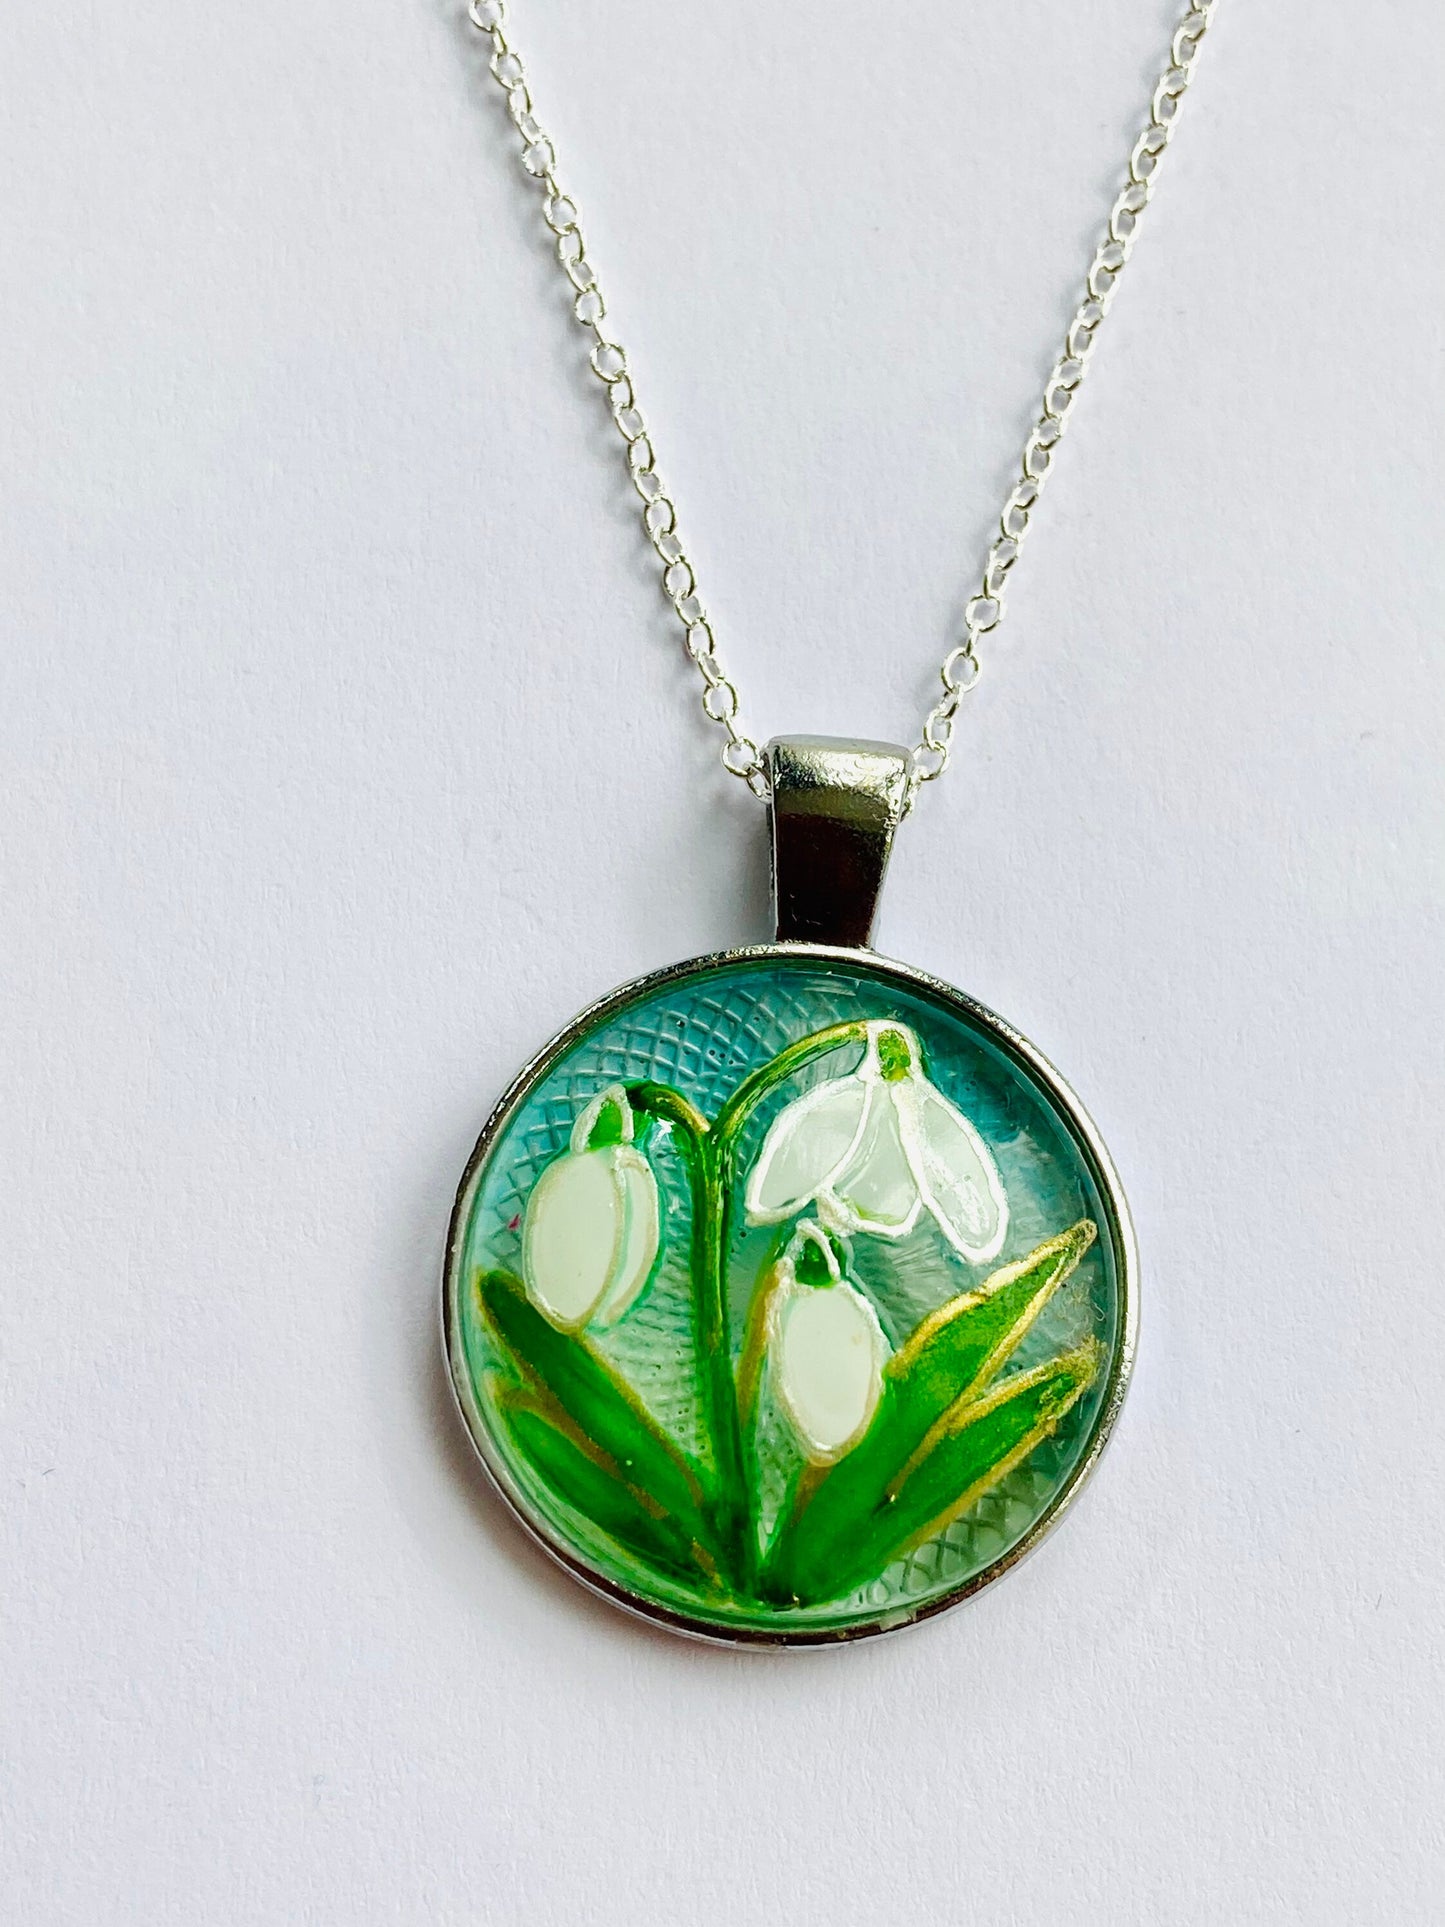 Snowdrops design hand painted glass pendant necklace